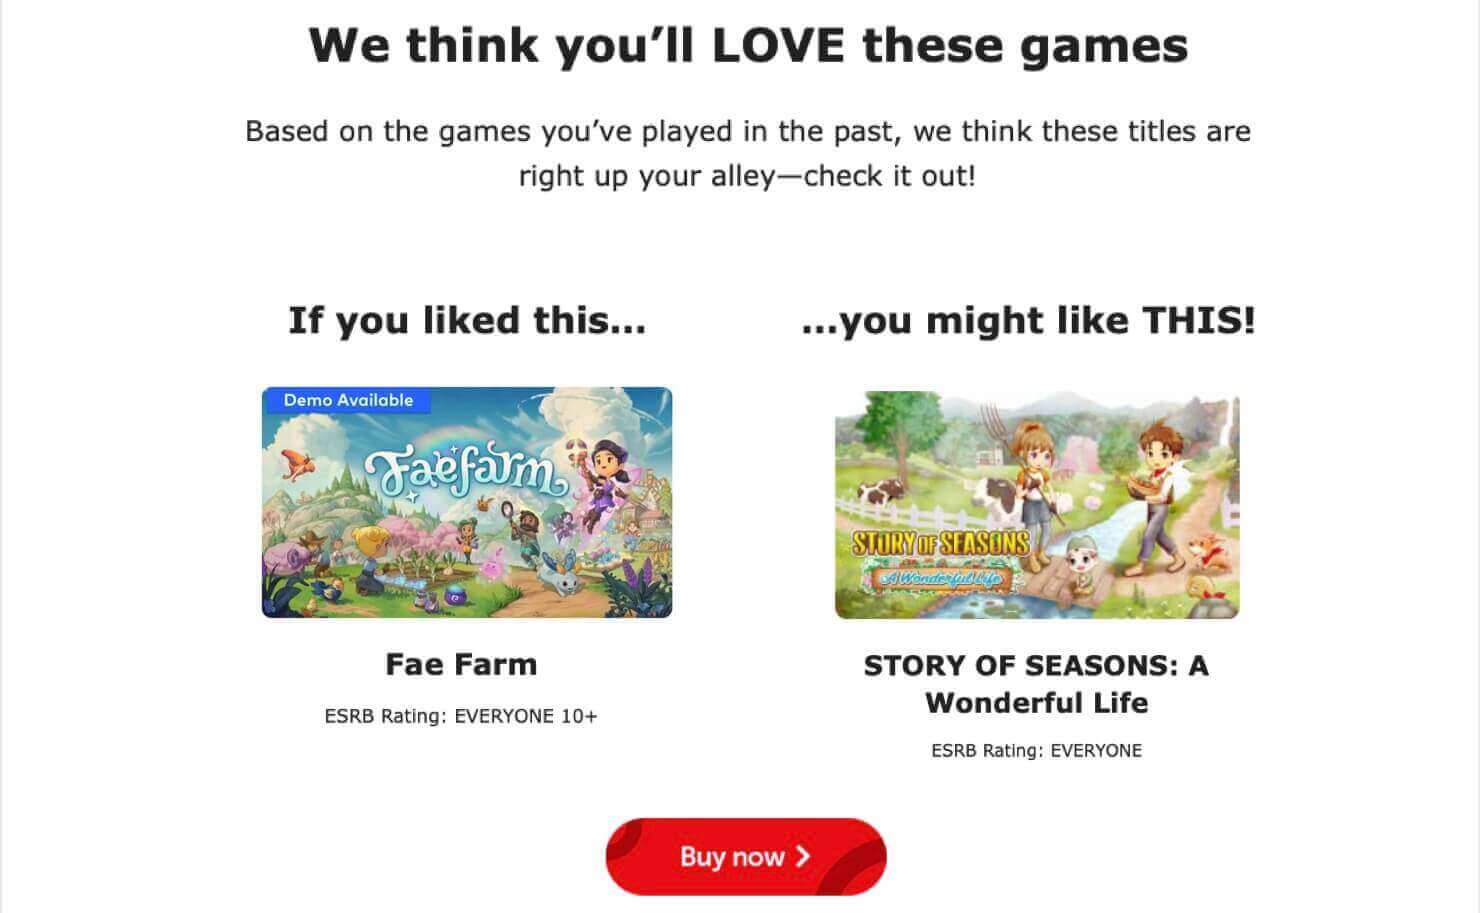 Nintendo cross-sell email examples. It says: "We think you'll LOVE these games. Based on the games you've played in the past, we think these titles are right up your alley-check it out!" It says "If you liked this . . . (product photo for the game Fae Farm) . . . you might like THIS! (product photo for Story of Seasons: A Wonderful Life." CTA button says "Buy Now."